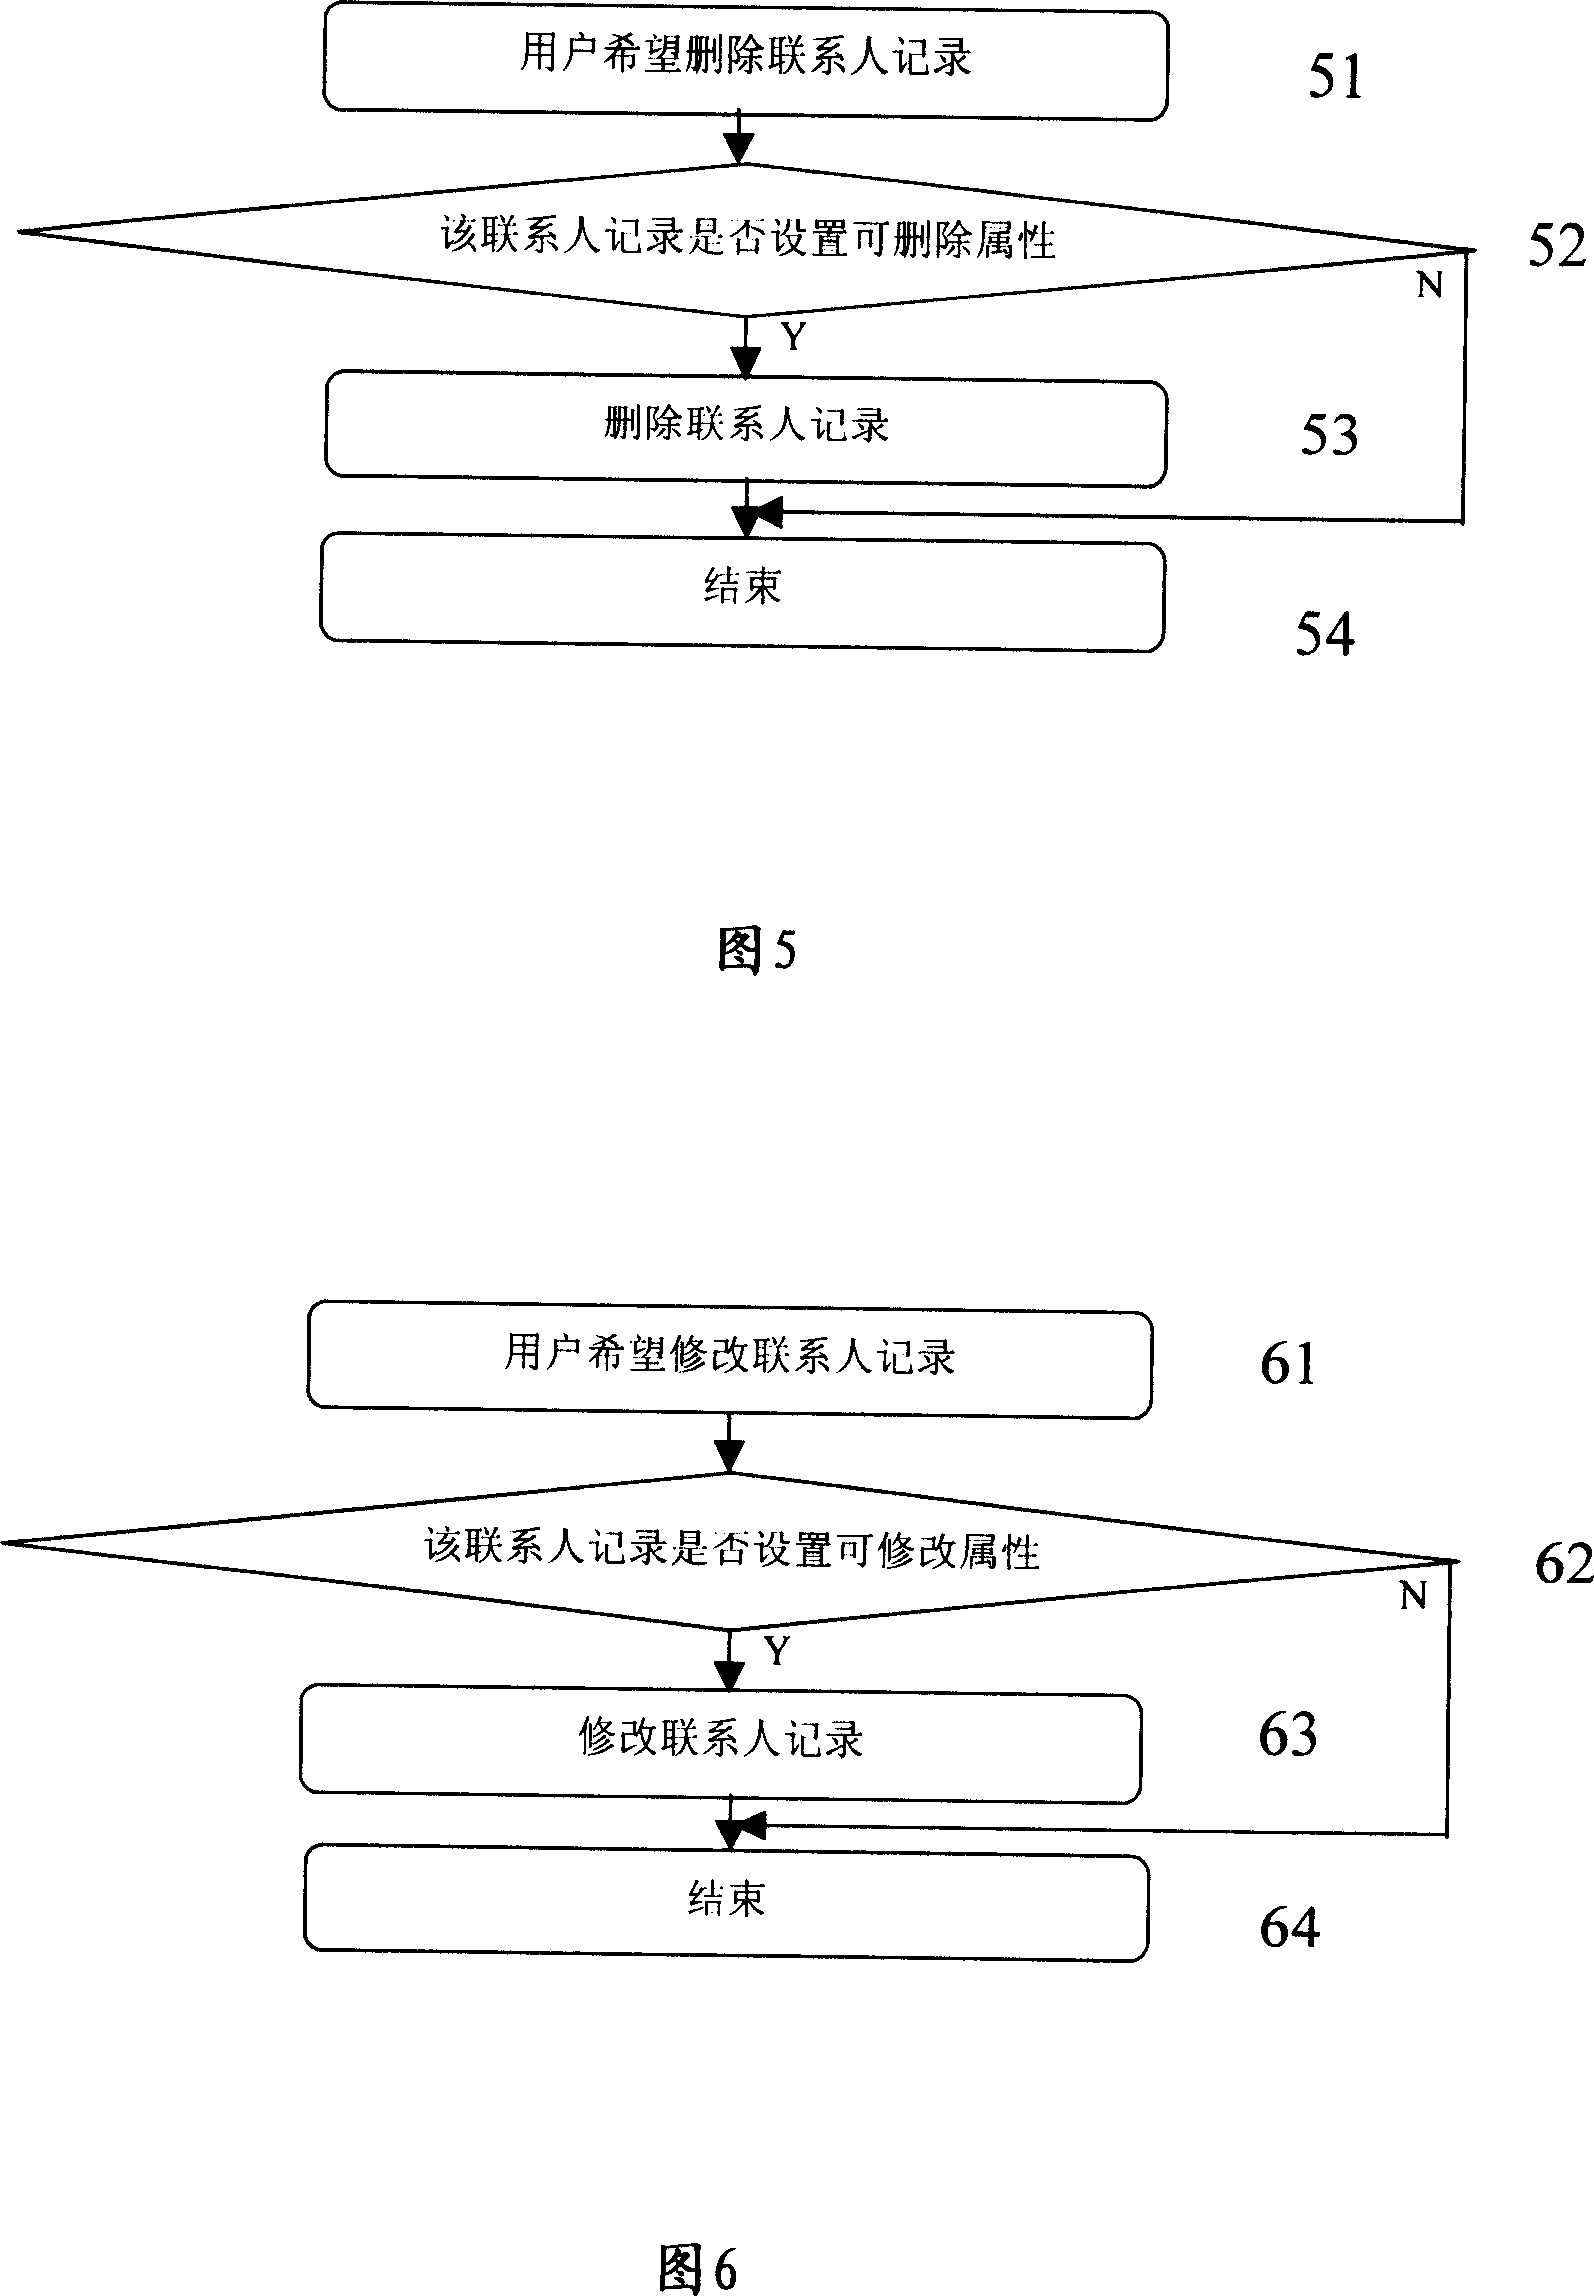 Method for managing telecommunication terminal telephone directory